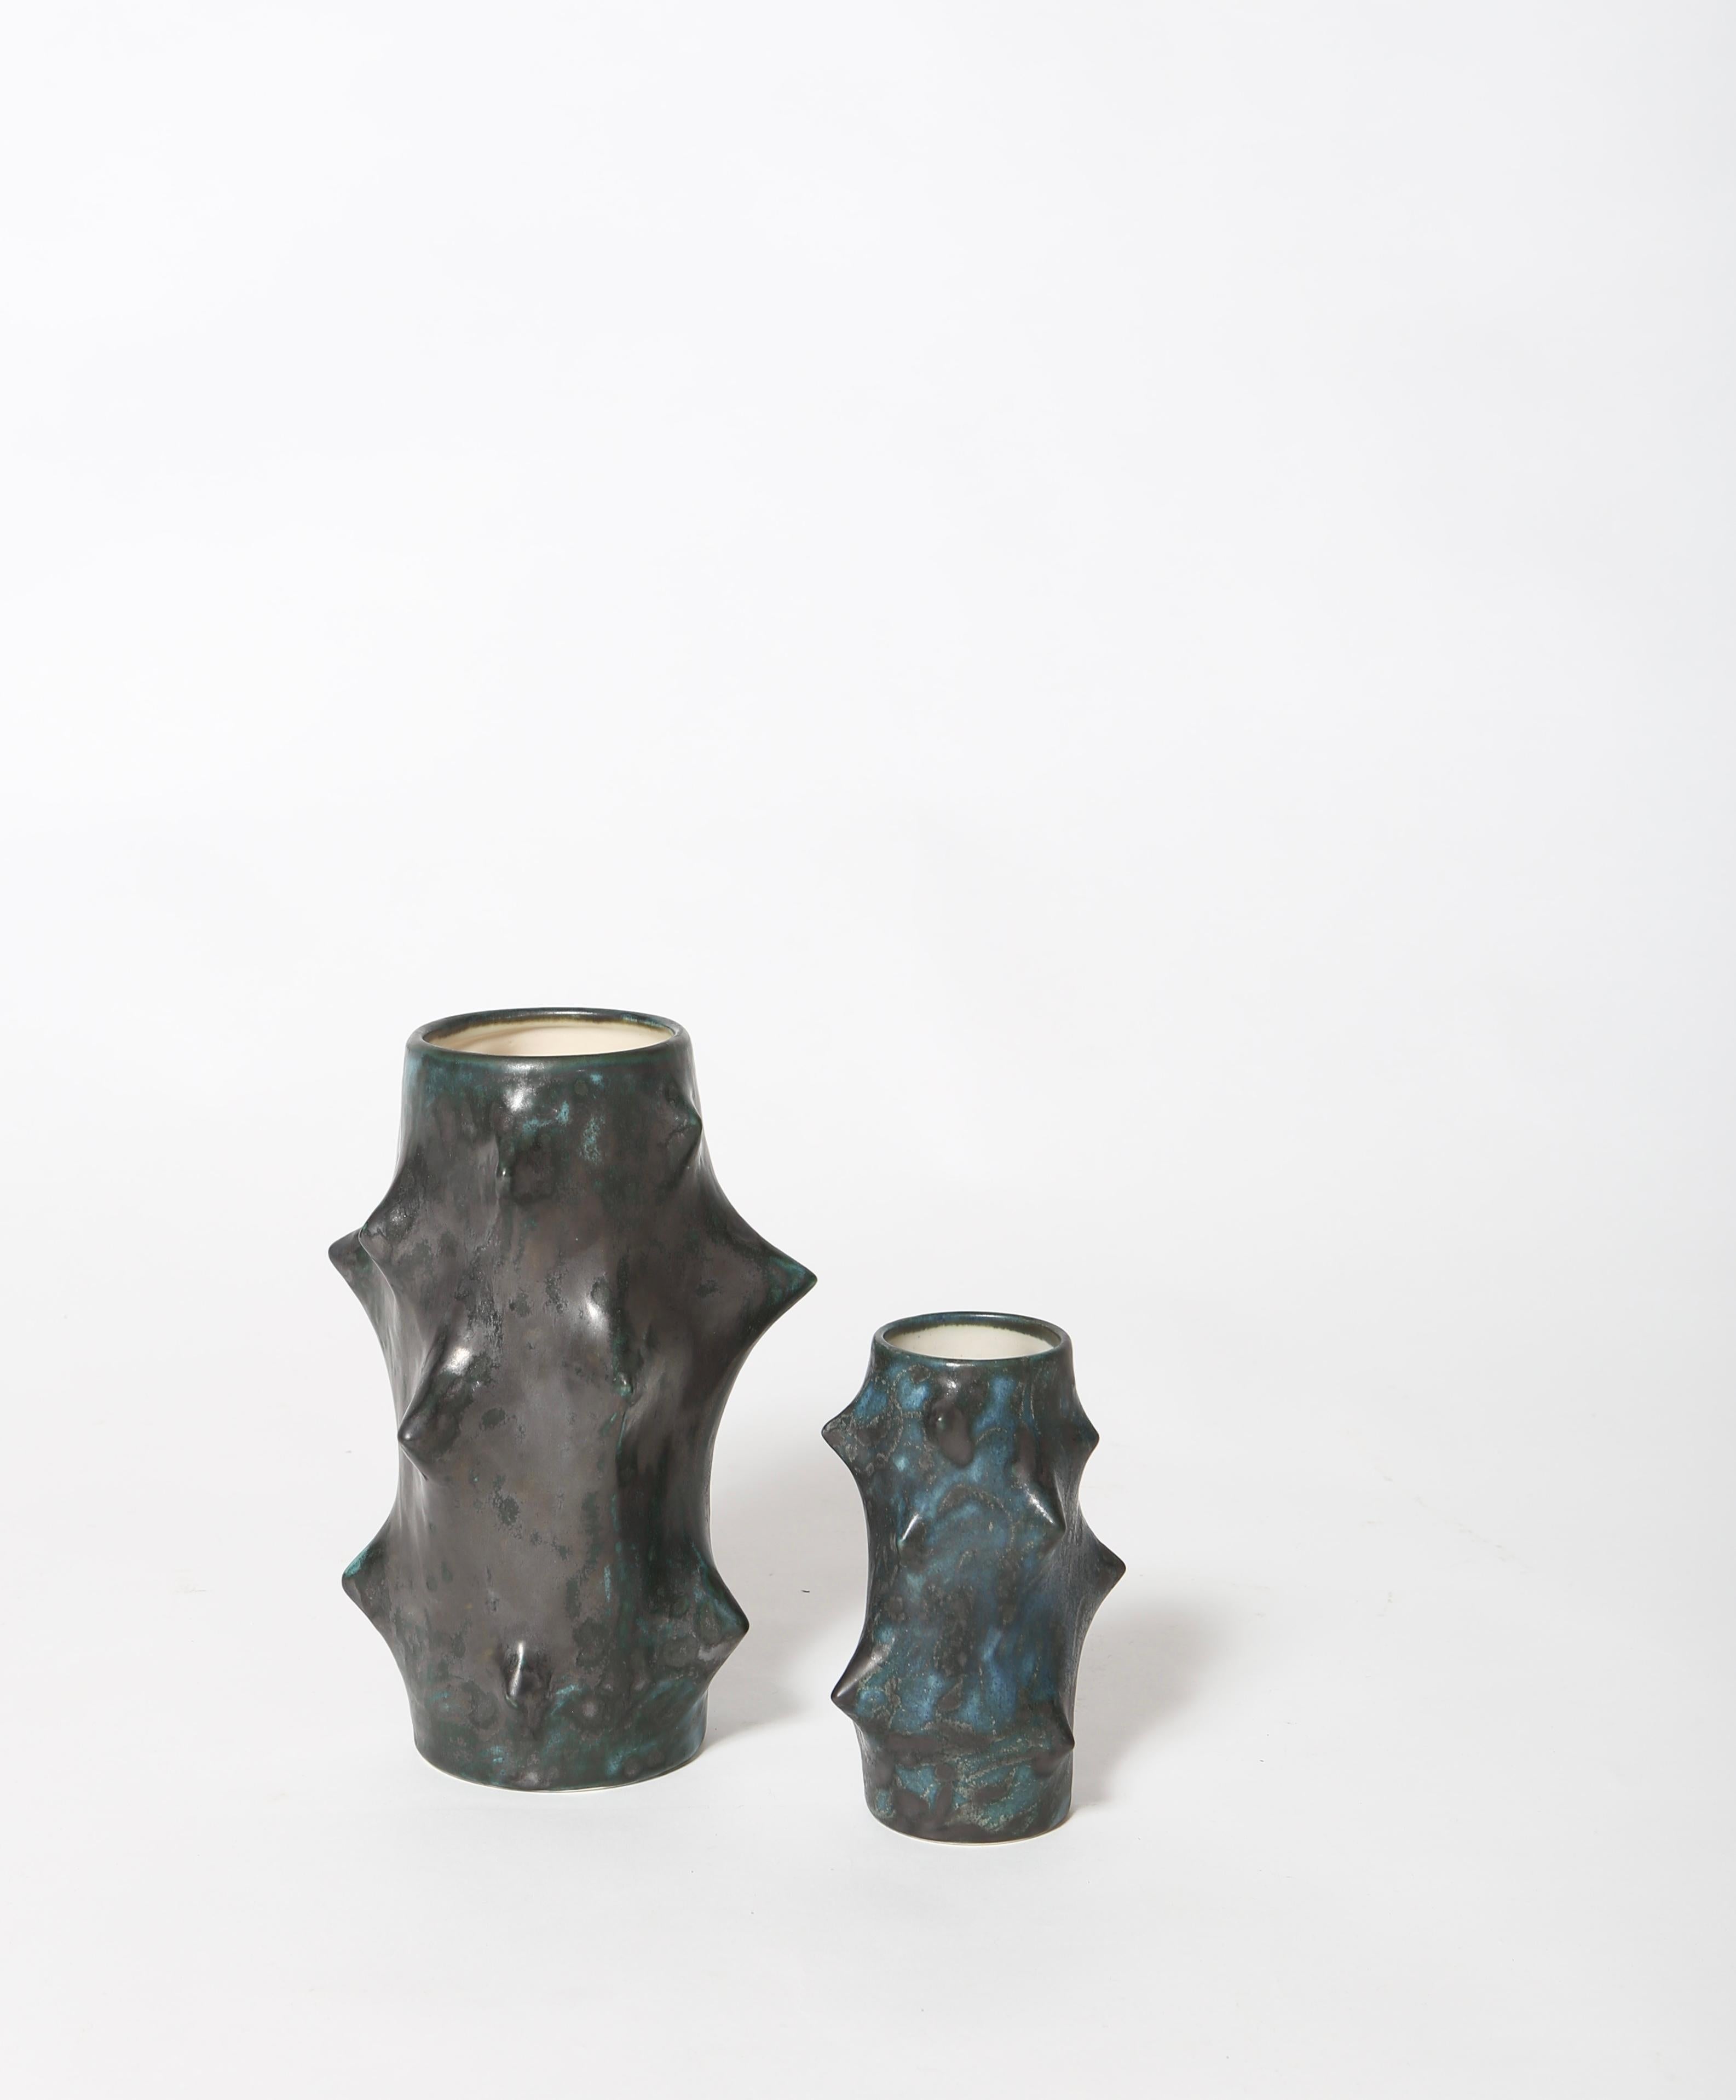 Fantastic early production set of “Rose Thorn” vases by Knud Basse. Petroleum green glaze with subtle iridescent black over glaze and ivory interior. Excellent condition, signed on underside. Rare to find!